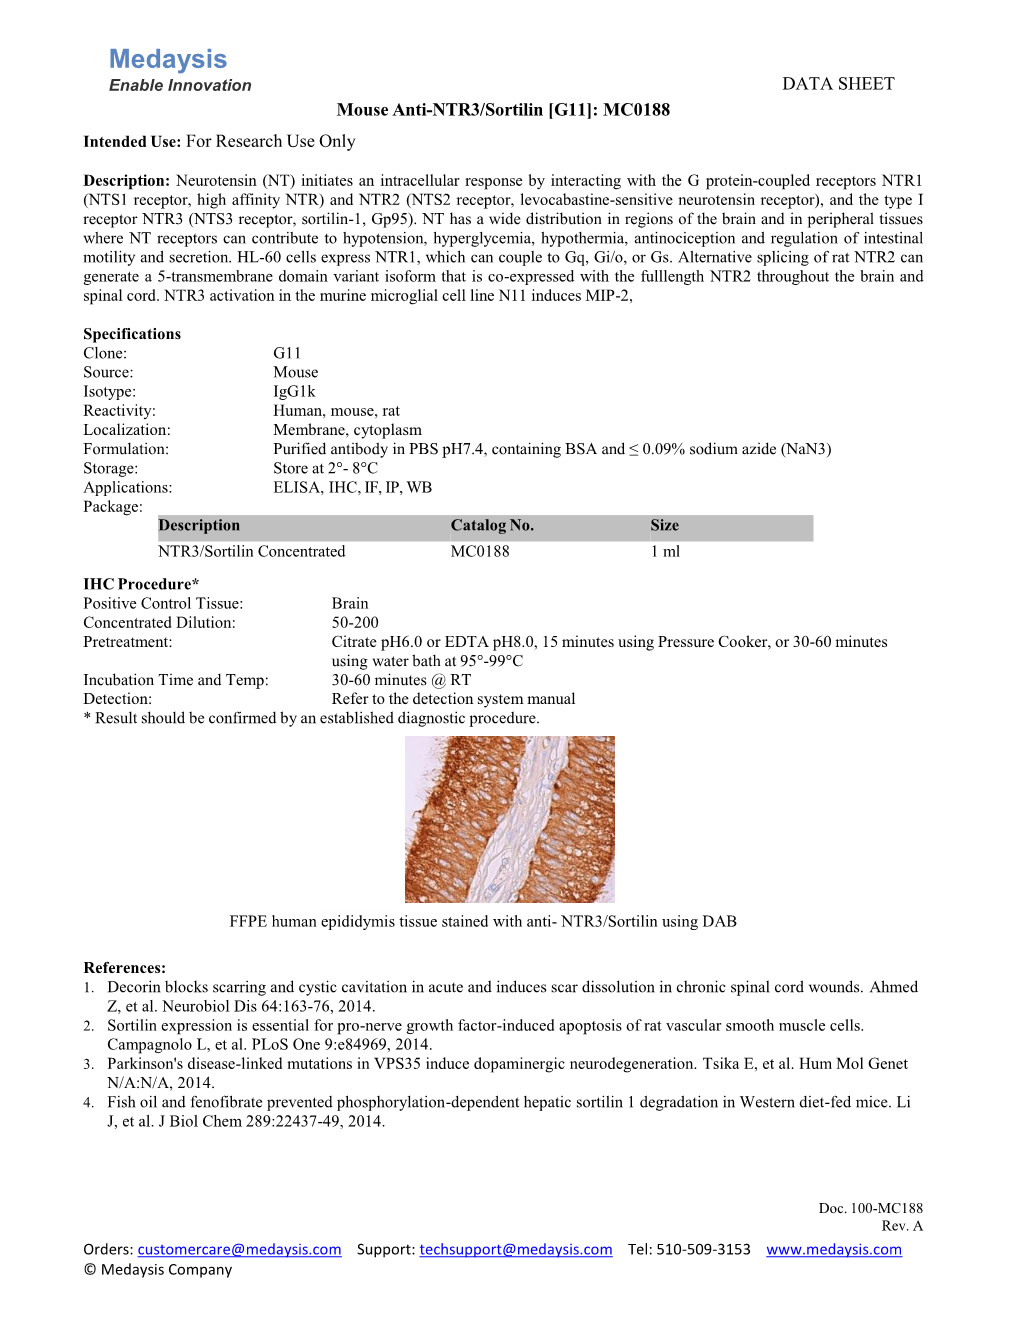 NTR3/Sortilin [G11]: MC0188 Intended Use: for Research Use Only